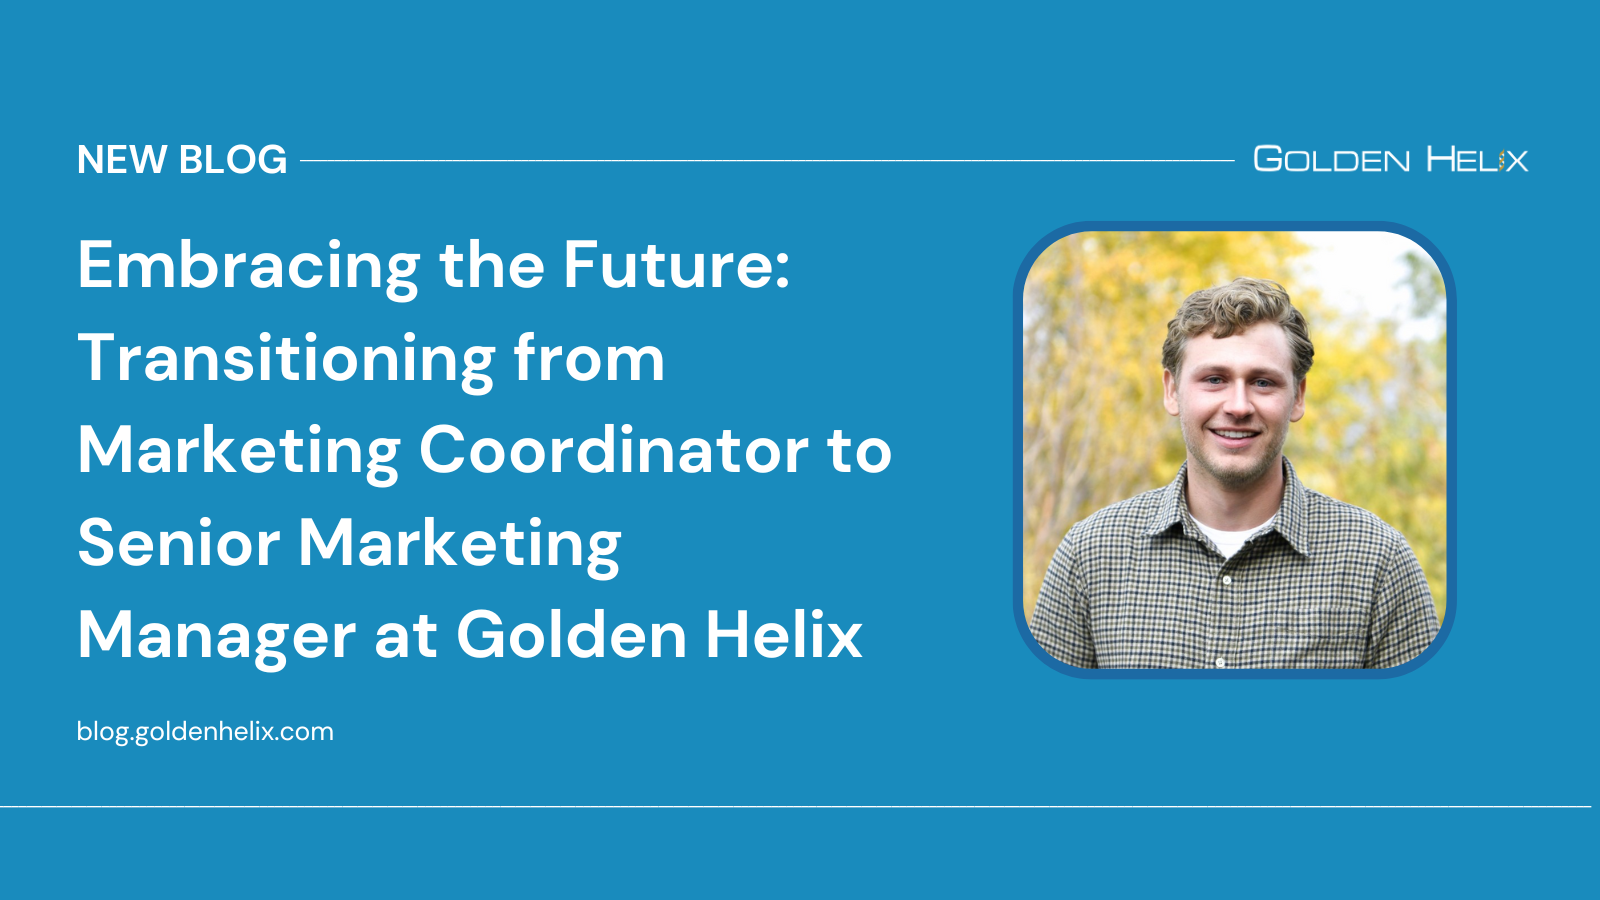 Embracing the Future: Transitioning from Marketing Coordinator to Senior Marketing Manager at Golden Helix